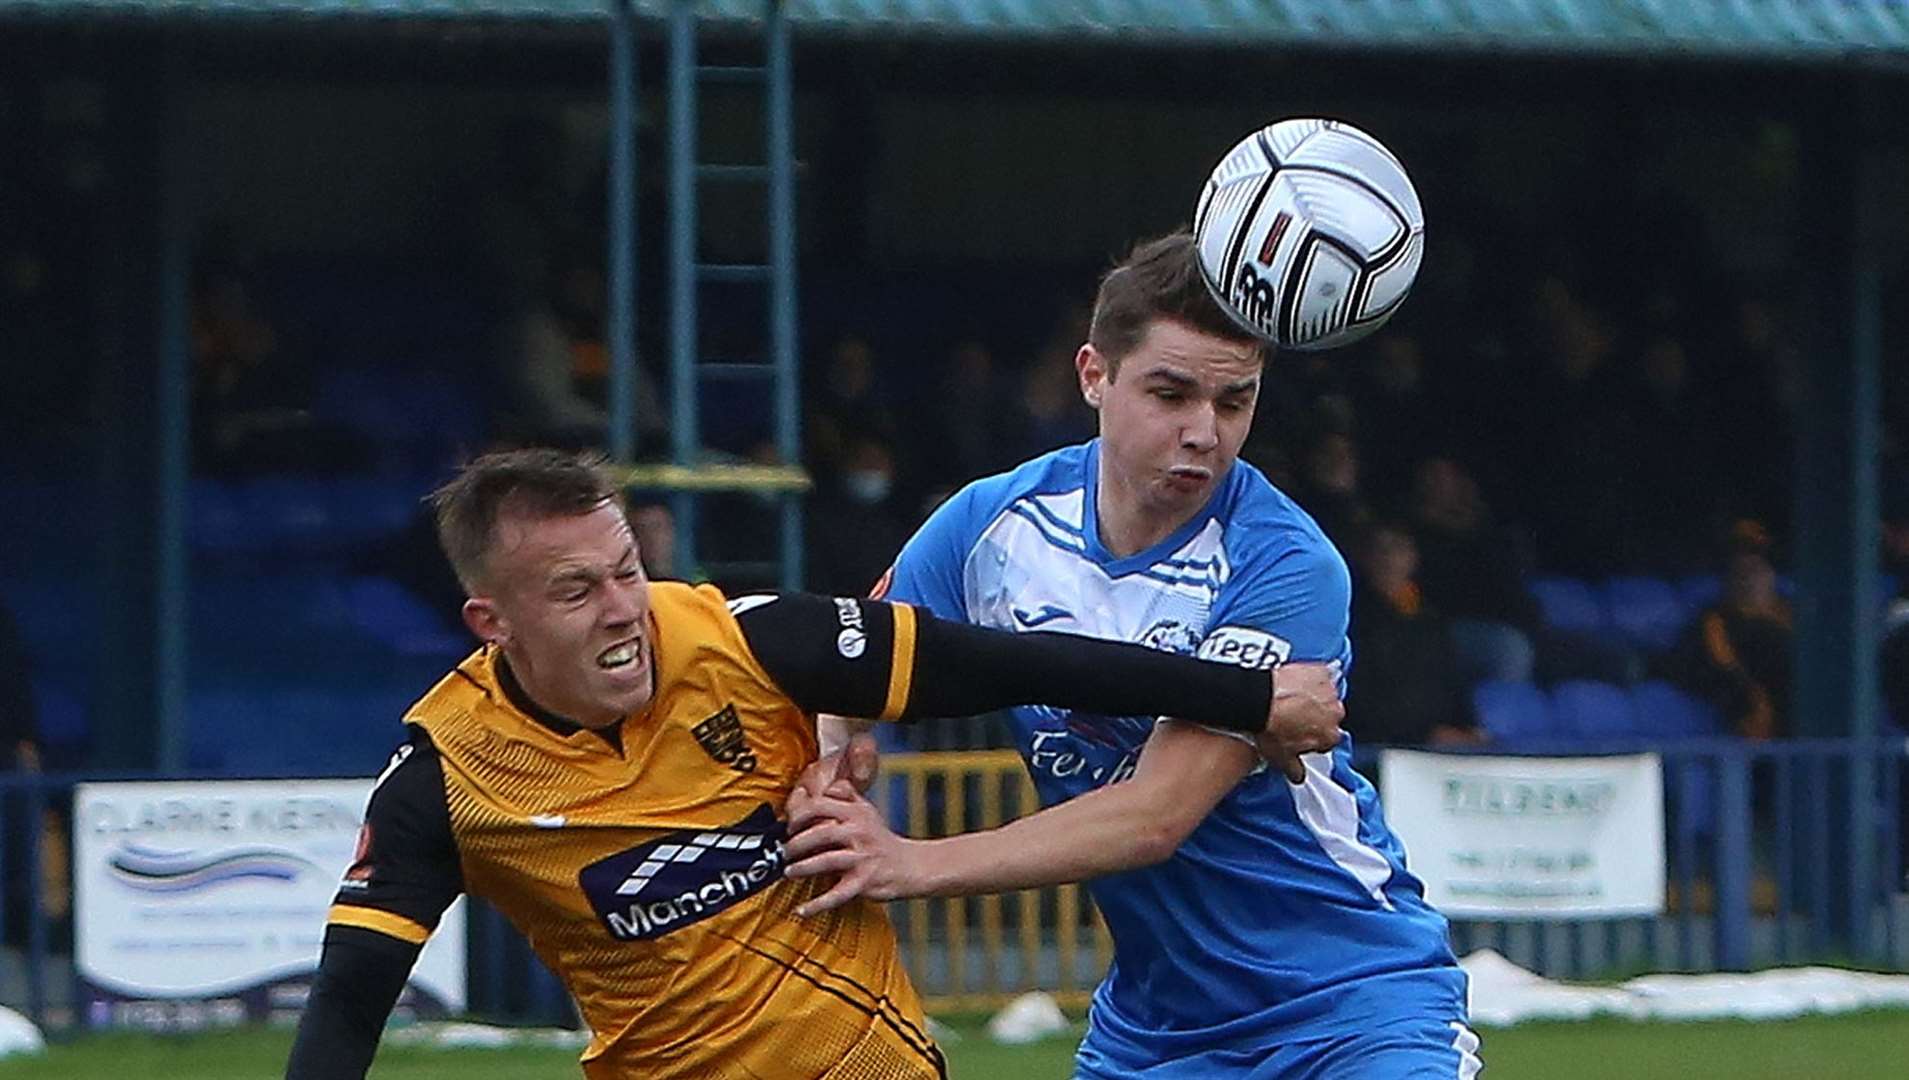 Former Maidstone and Tonbridge striker Jake Embery, right, scored on his Faversham debut. Picture: Dave Couldridge